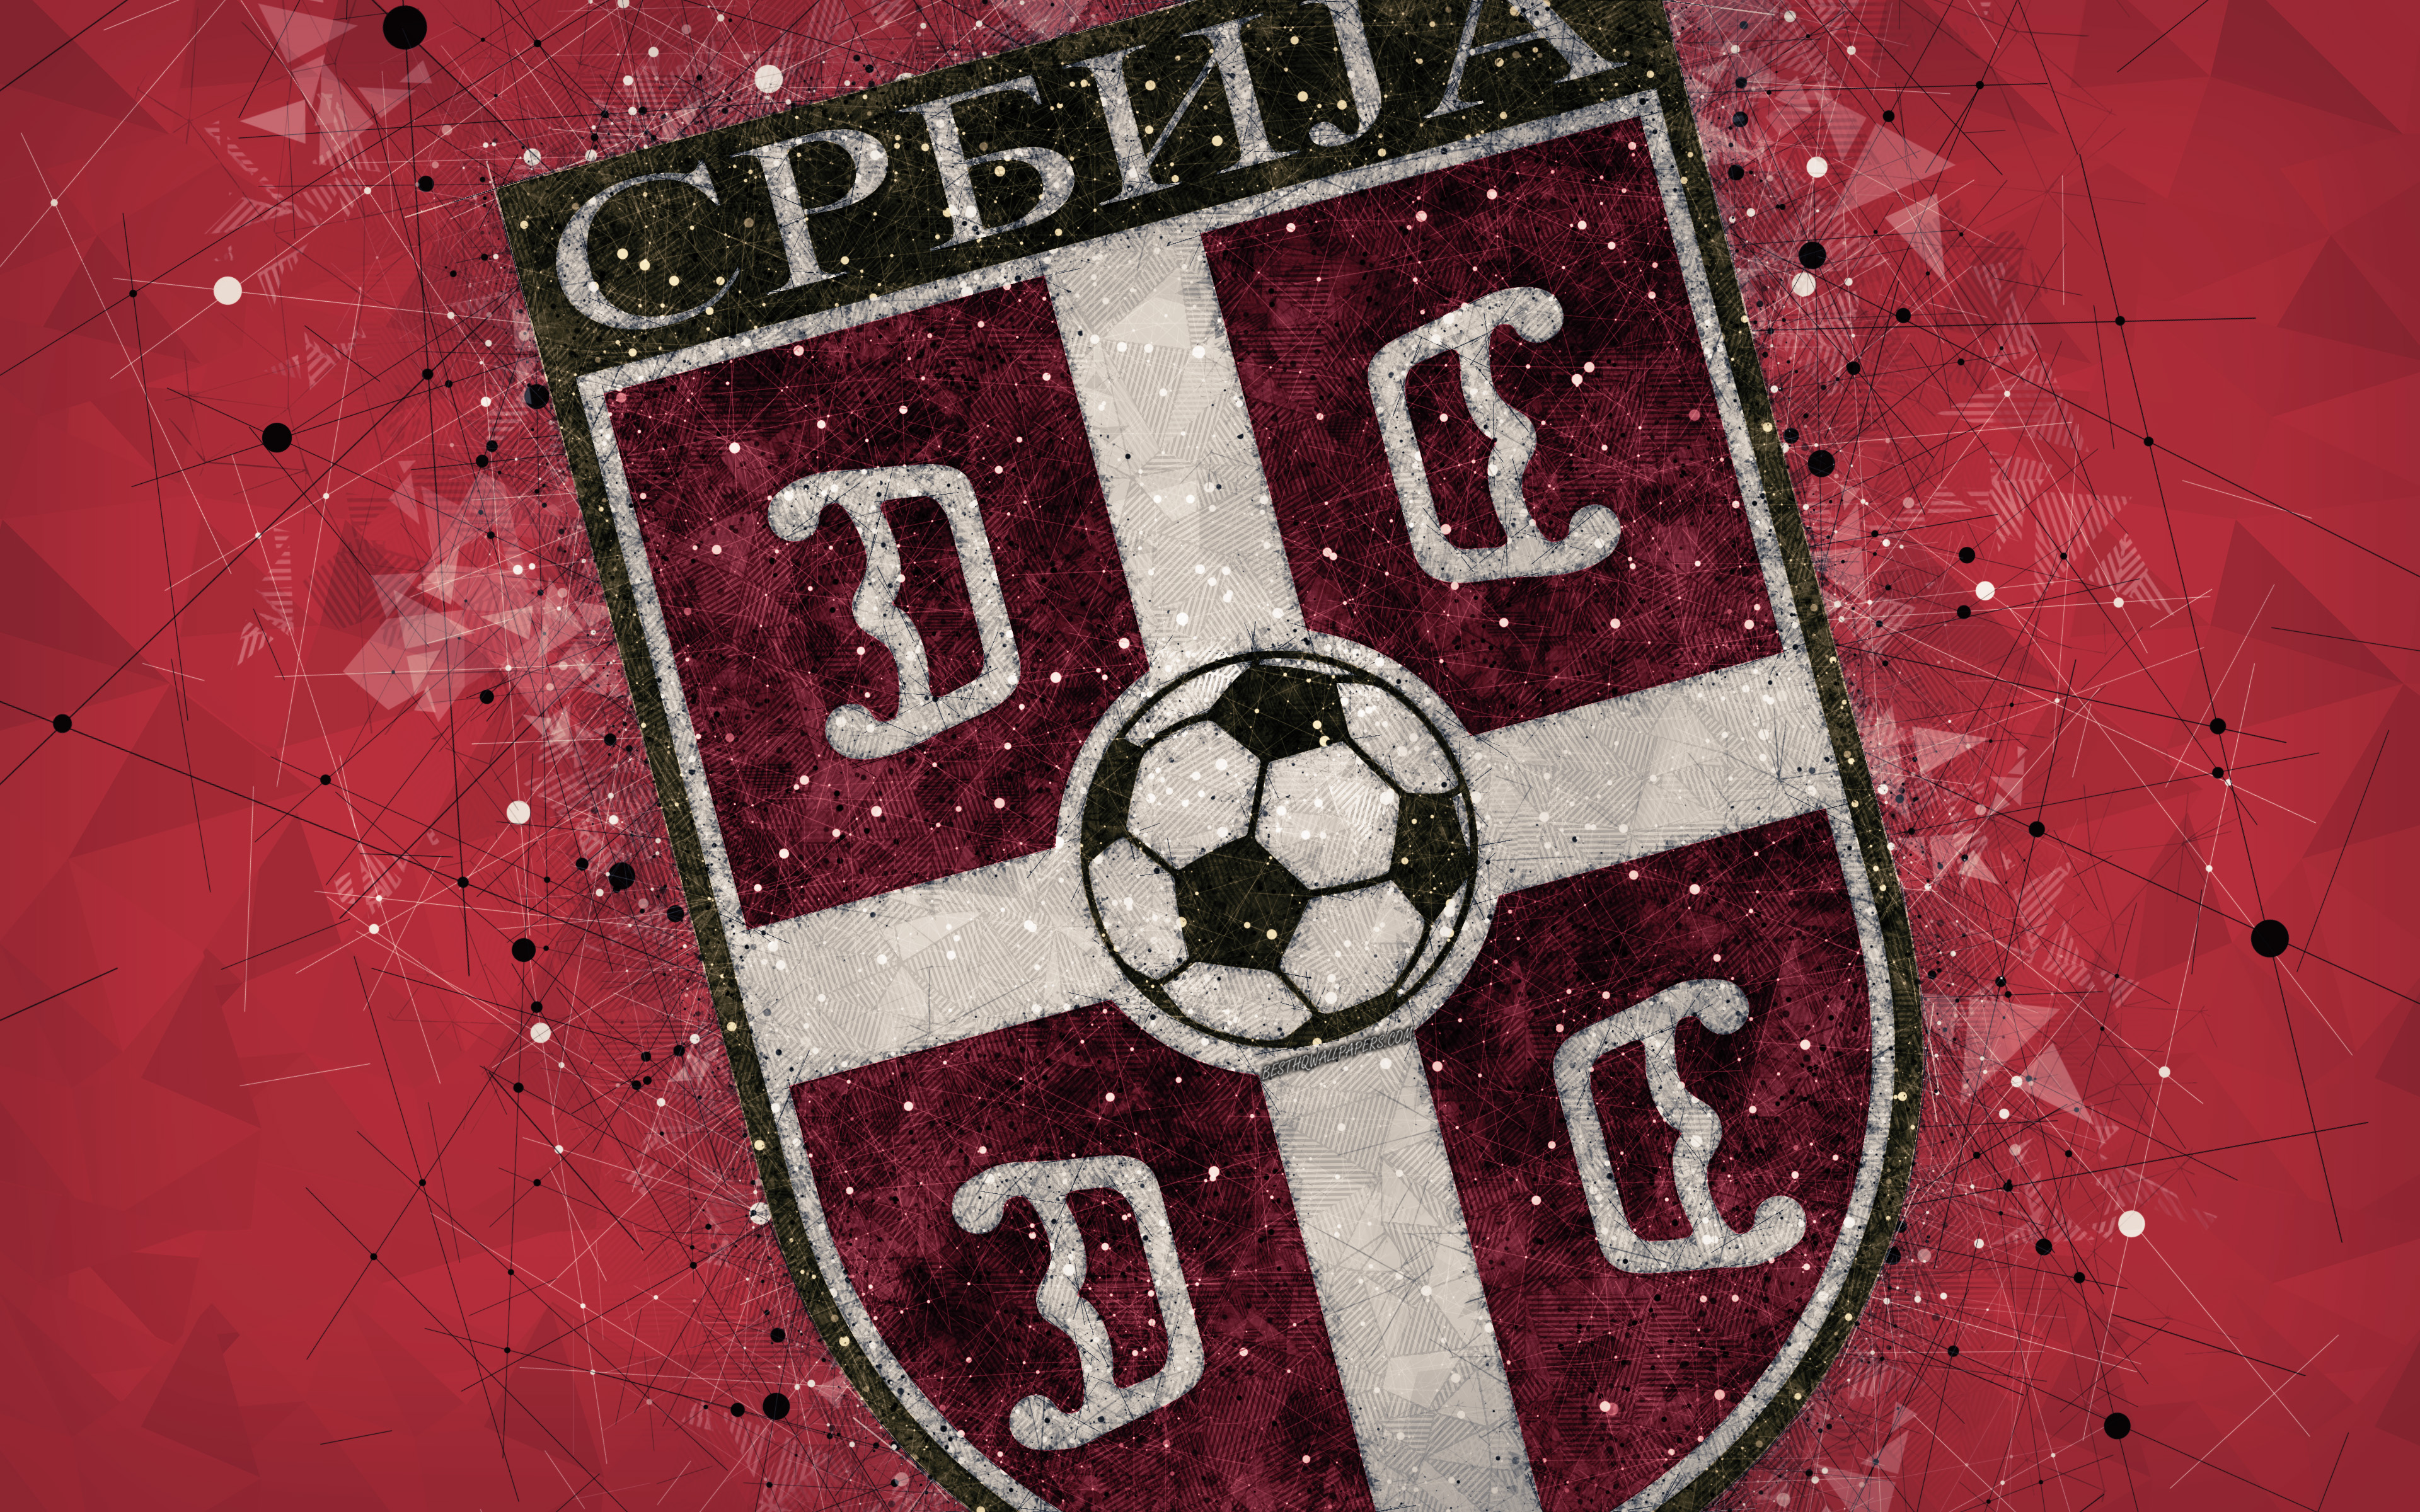 Serbia National Football Team Wallpapers